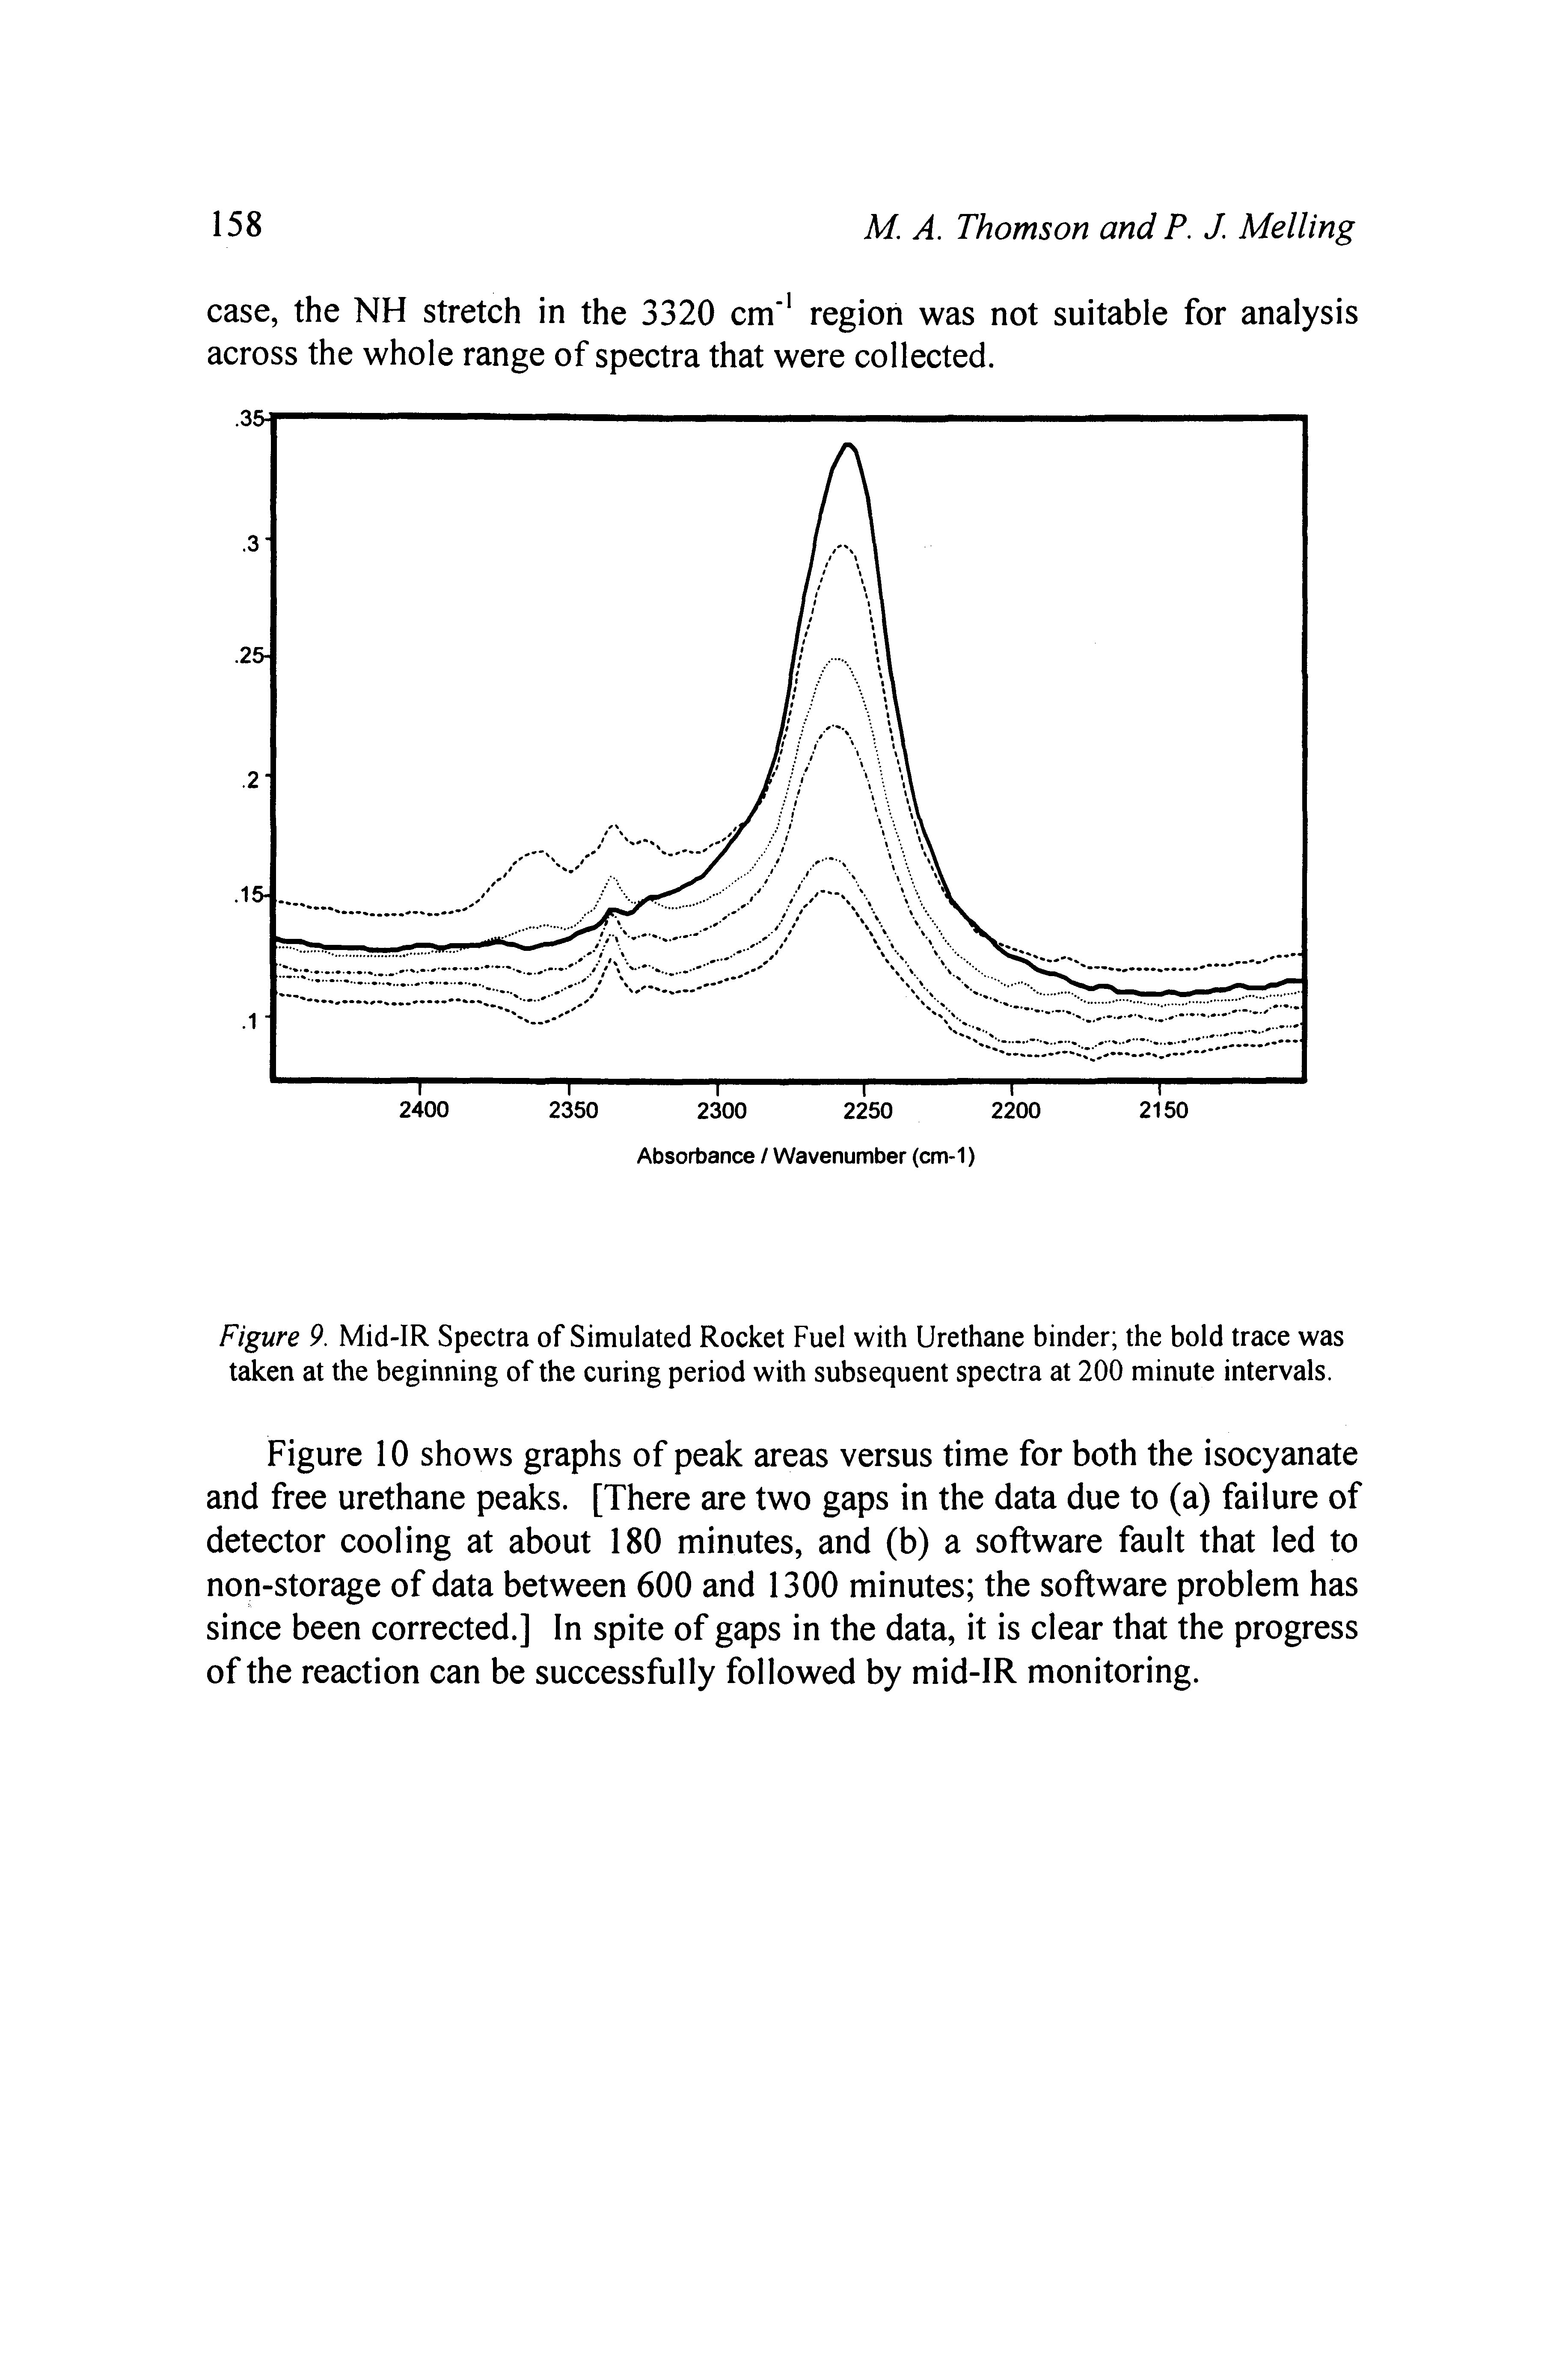 Figure 9. Mid-IR Spectra of Simulated Rocket Fuel with Urethane binder the bold trace was taken at the beginning of the curing period with subsequent spectra at 200 minute intervals.